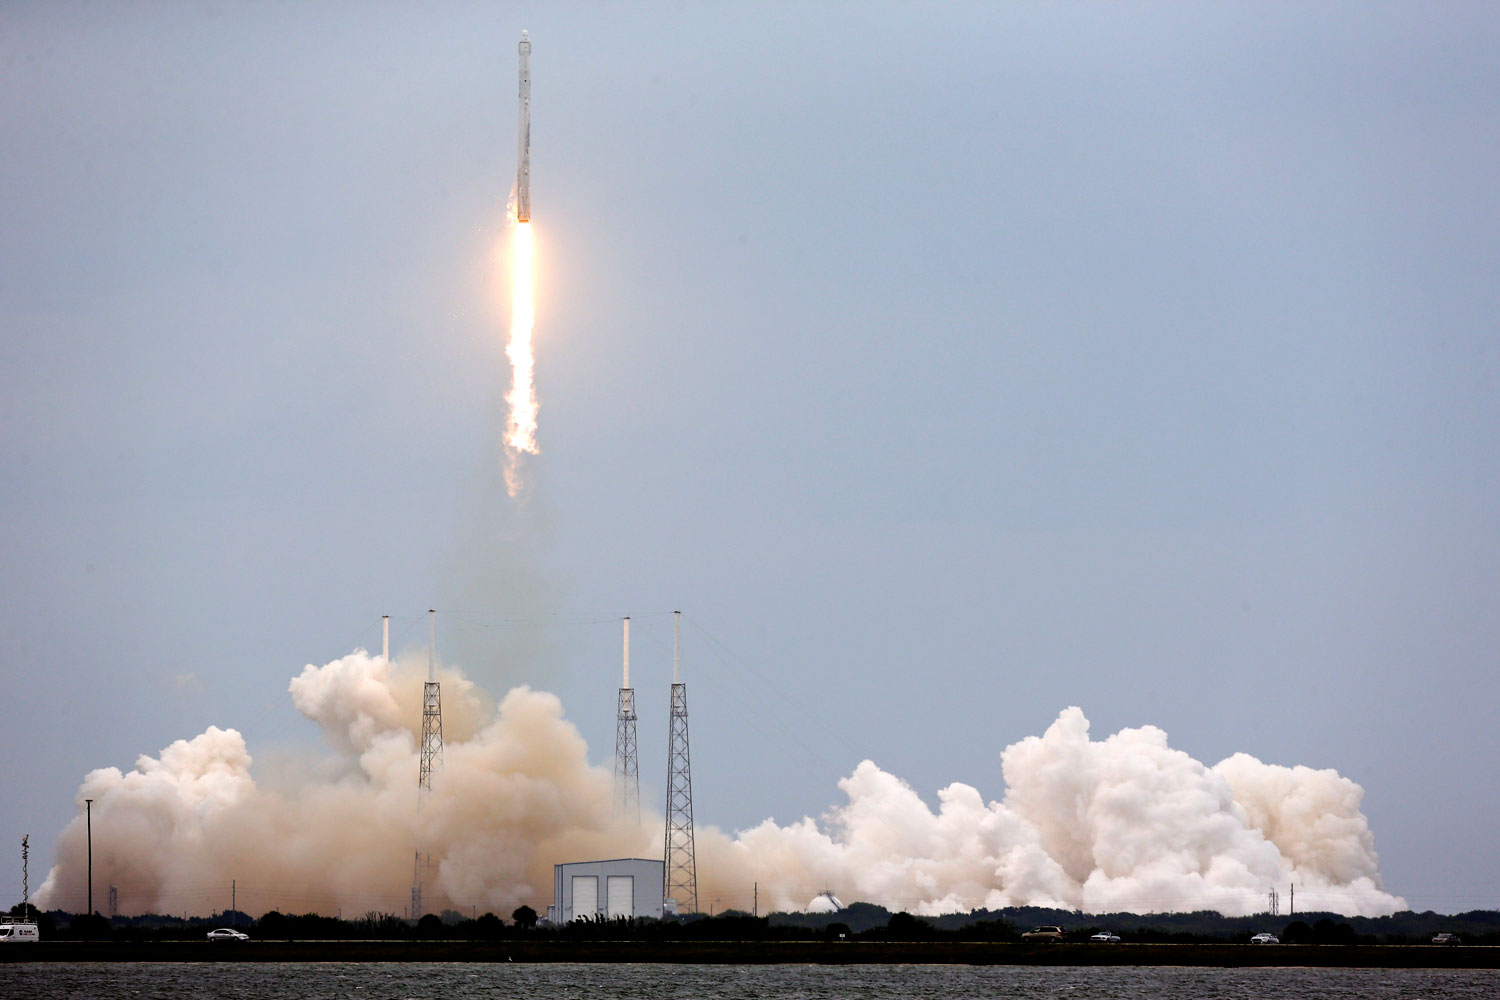 A rocket carrying the SpaceX Dragon ship lifts off from launch complex 40 at the Cape Canaveral Air Force Station in Cape Canaveral, Fla. on  April 18, 2014.